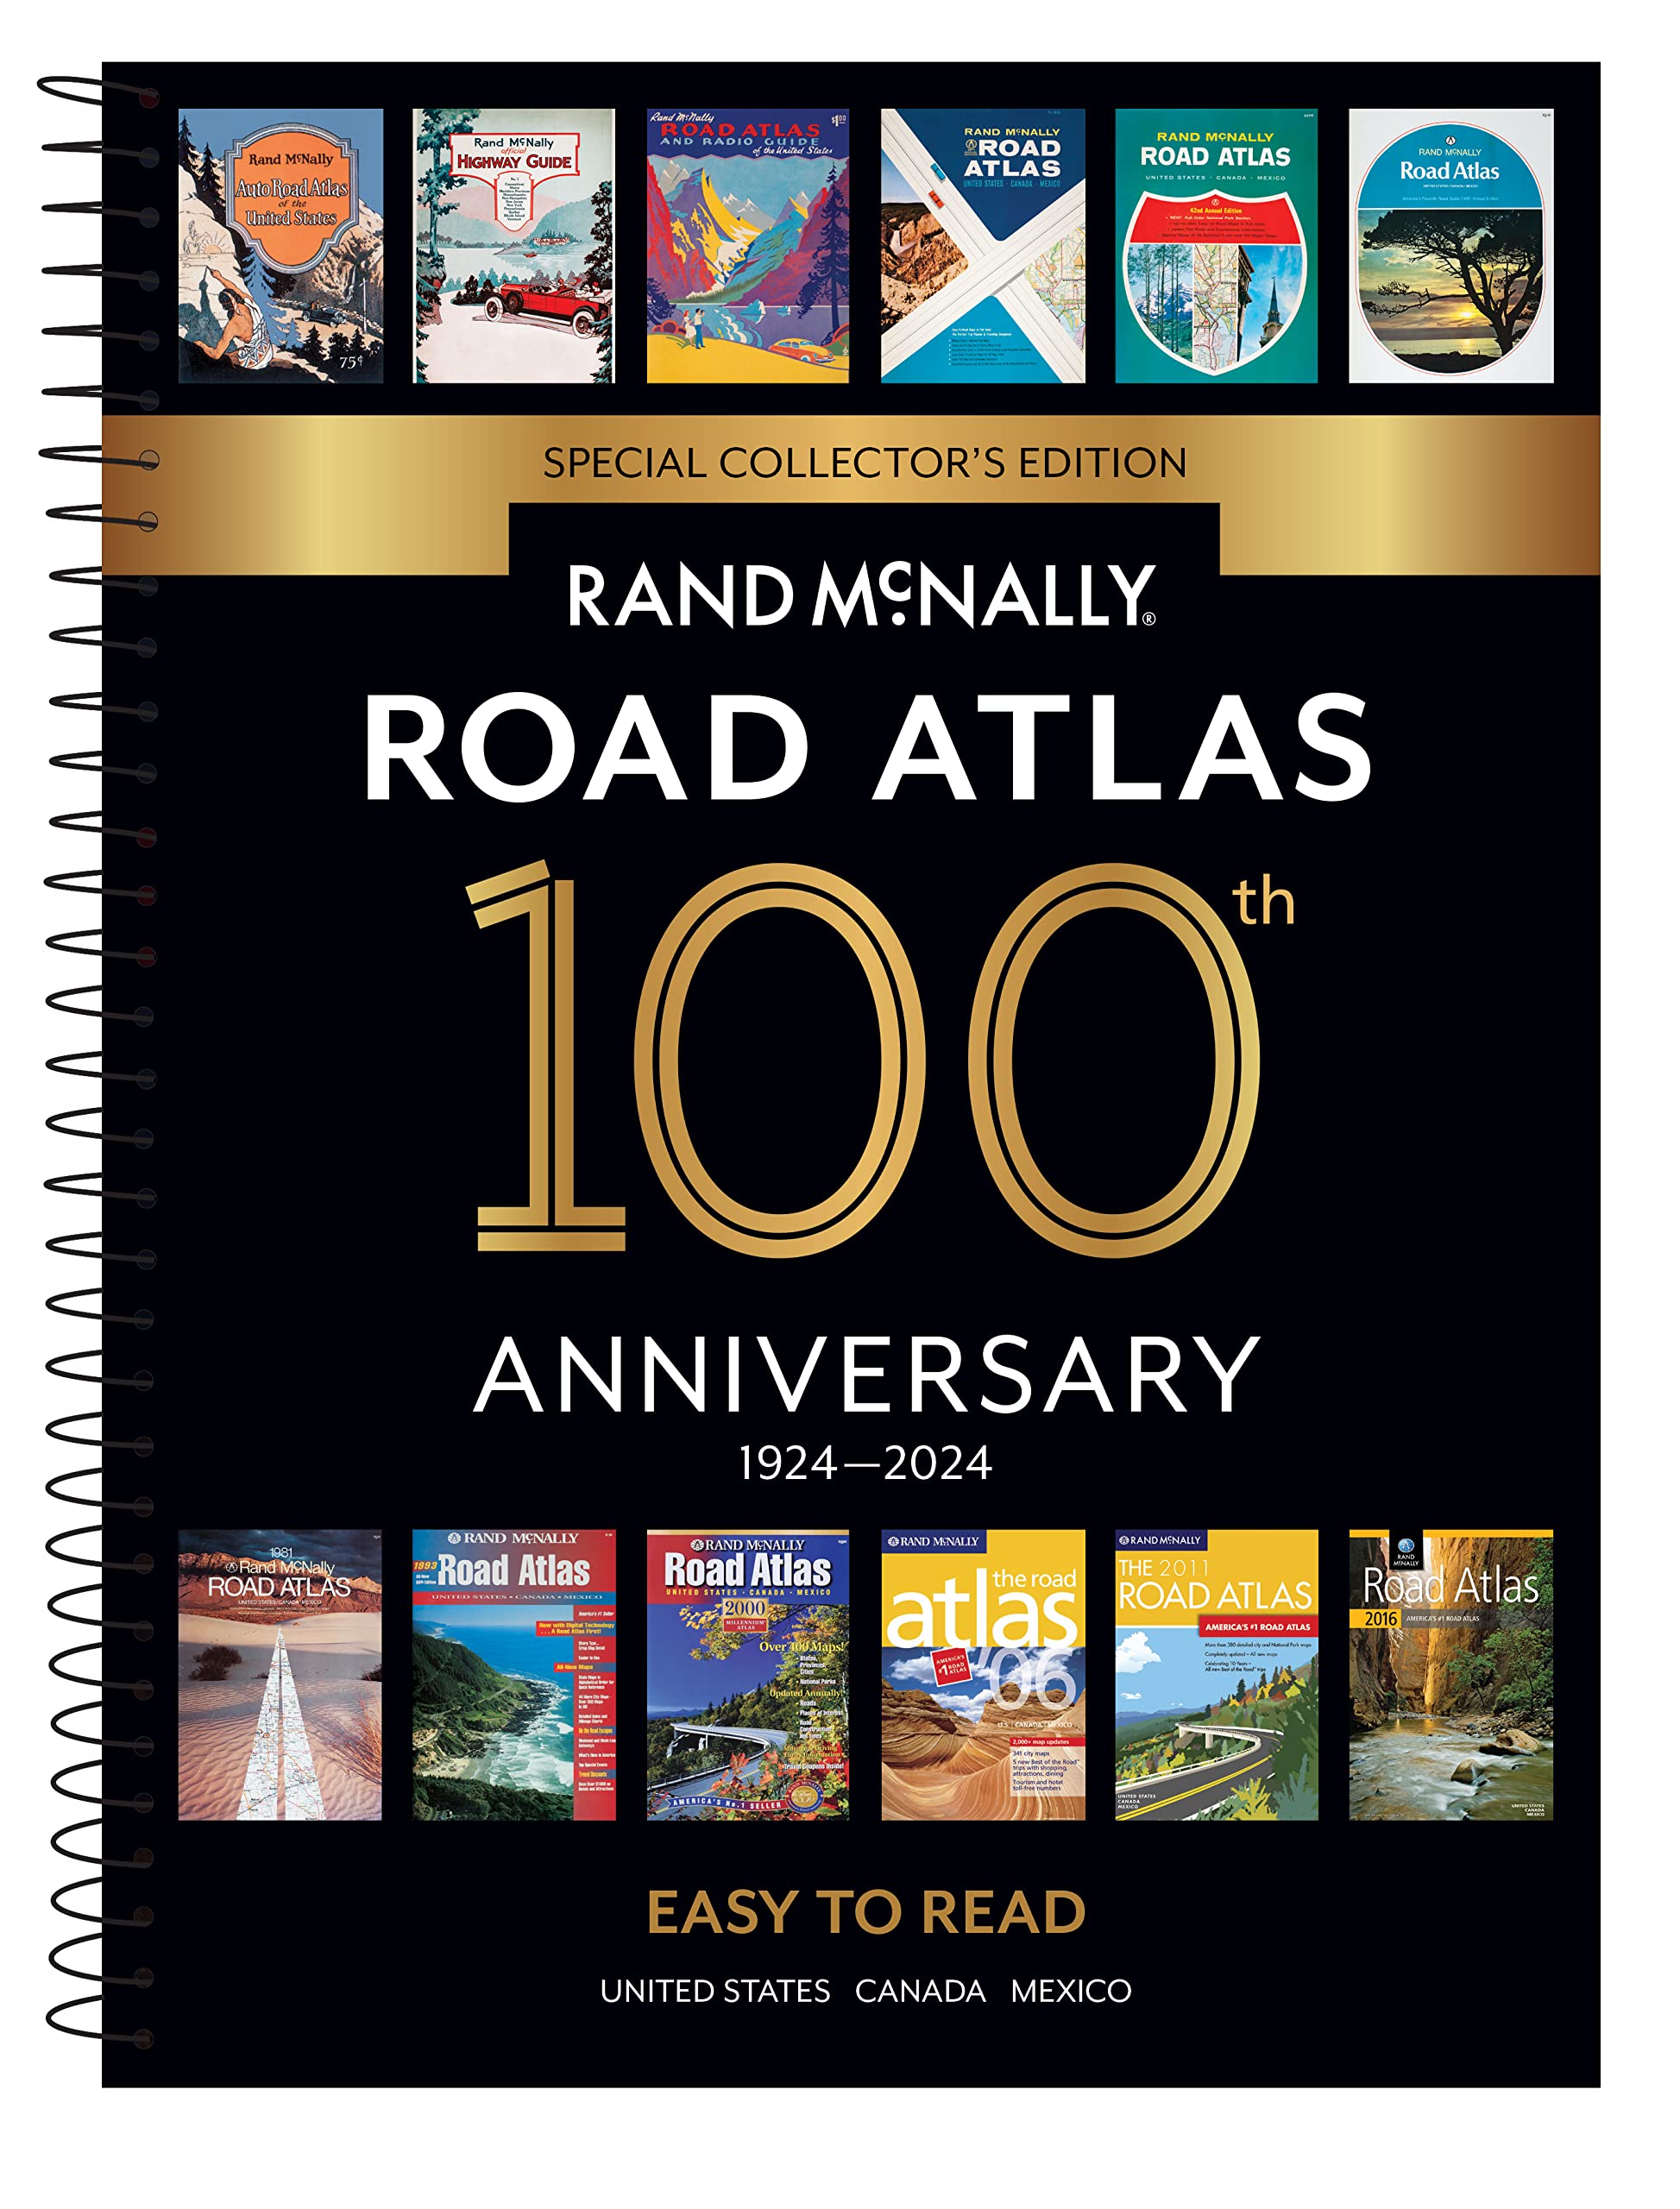 United States / Canada / Mexico Road Atlas: Easy to Read 100 Anniversary Edition by Rand McNally (2023)